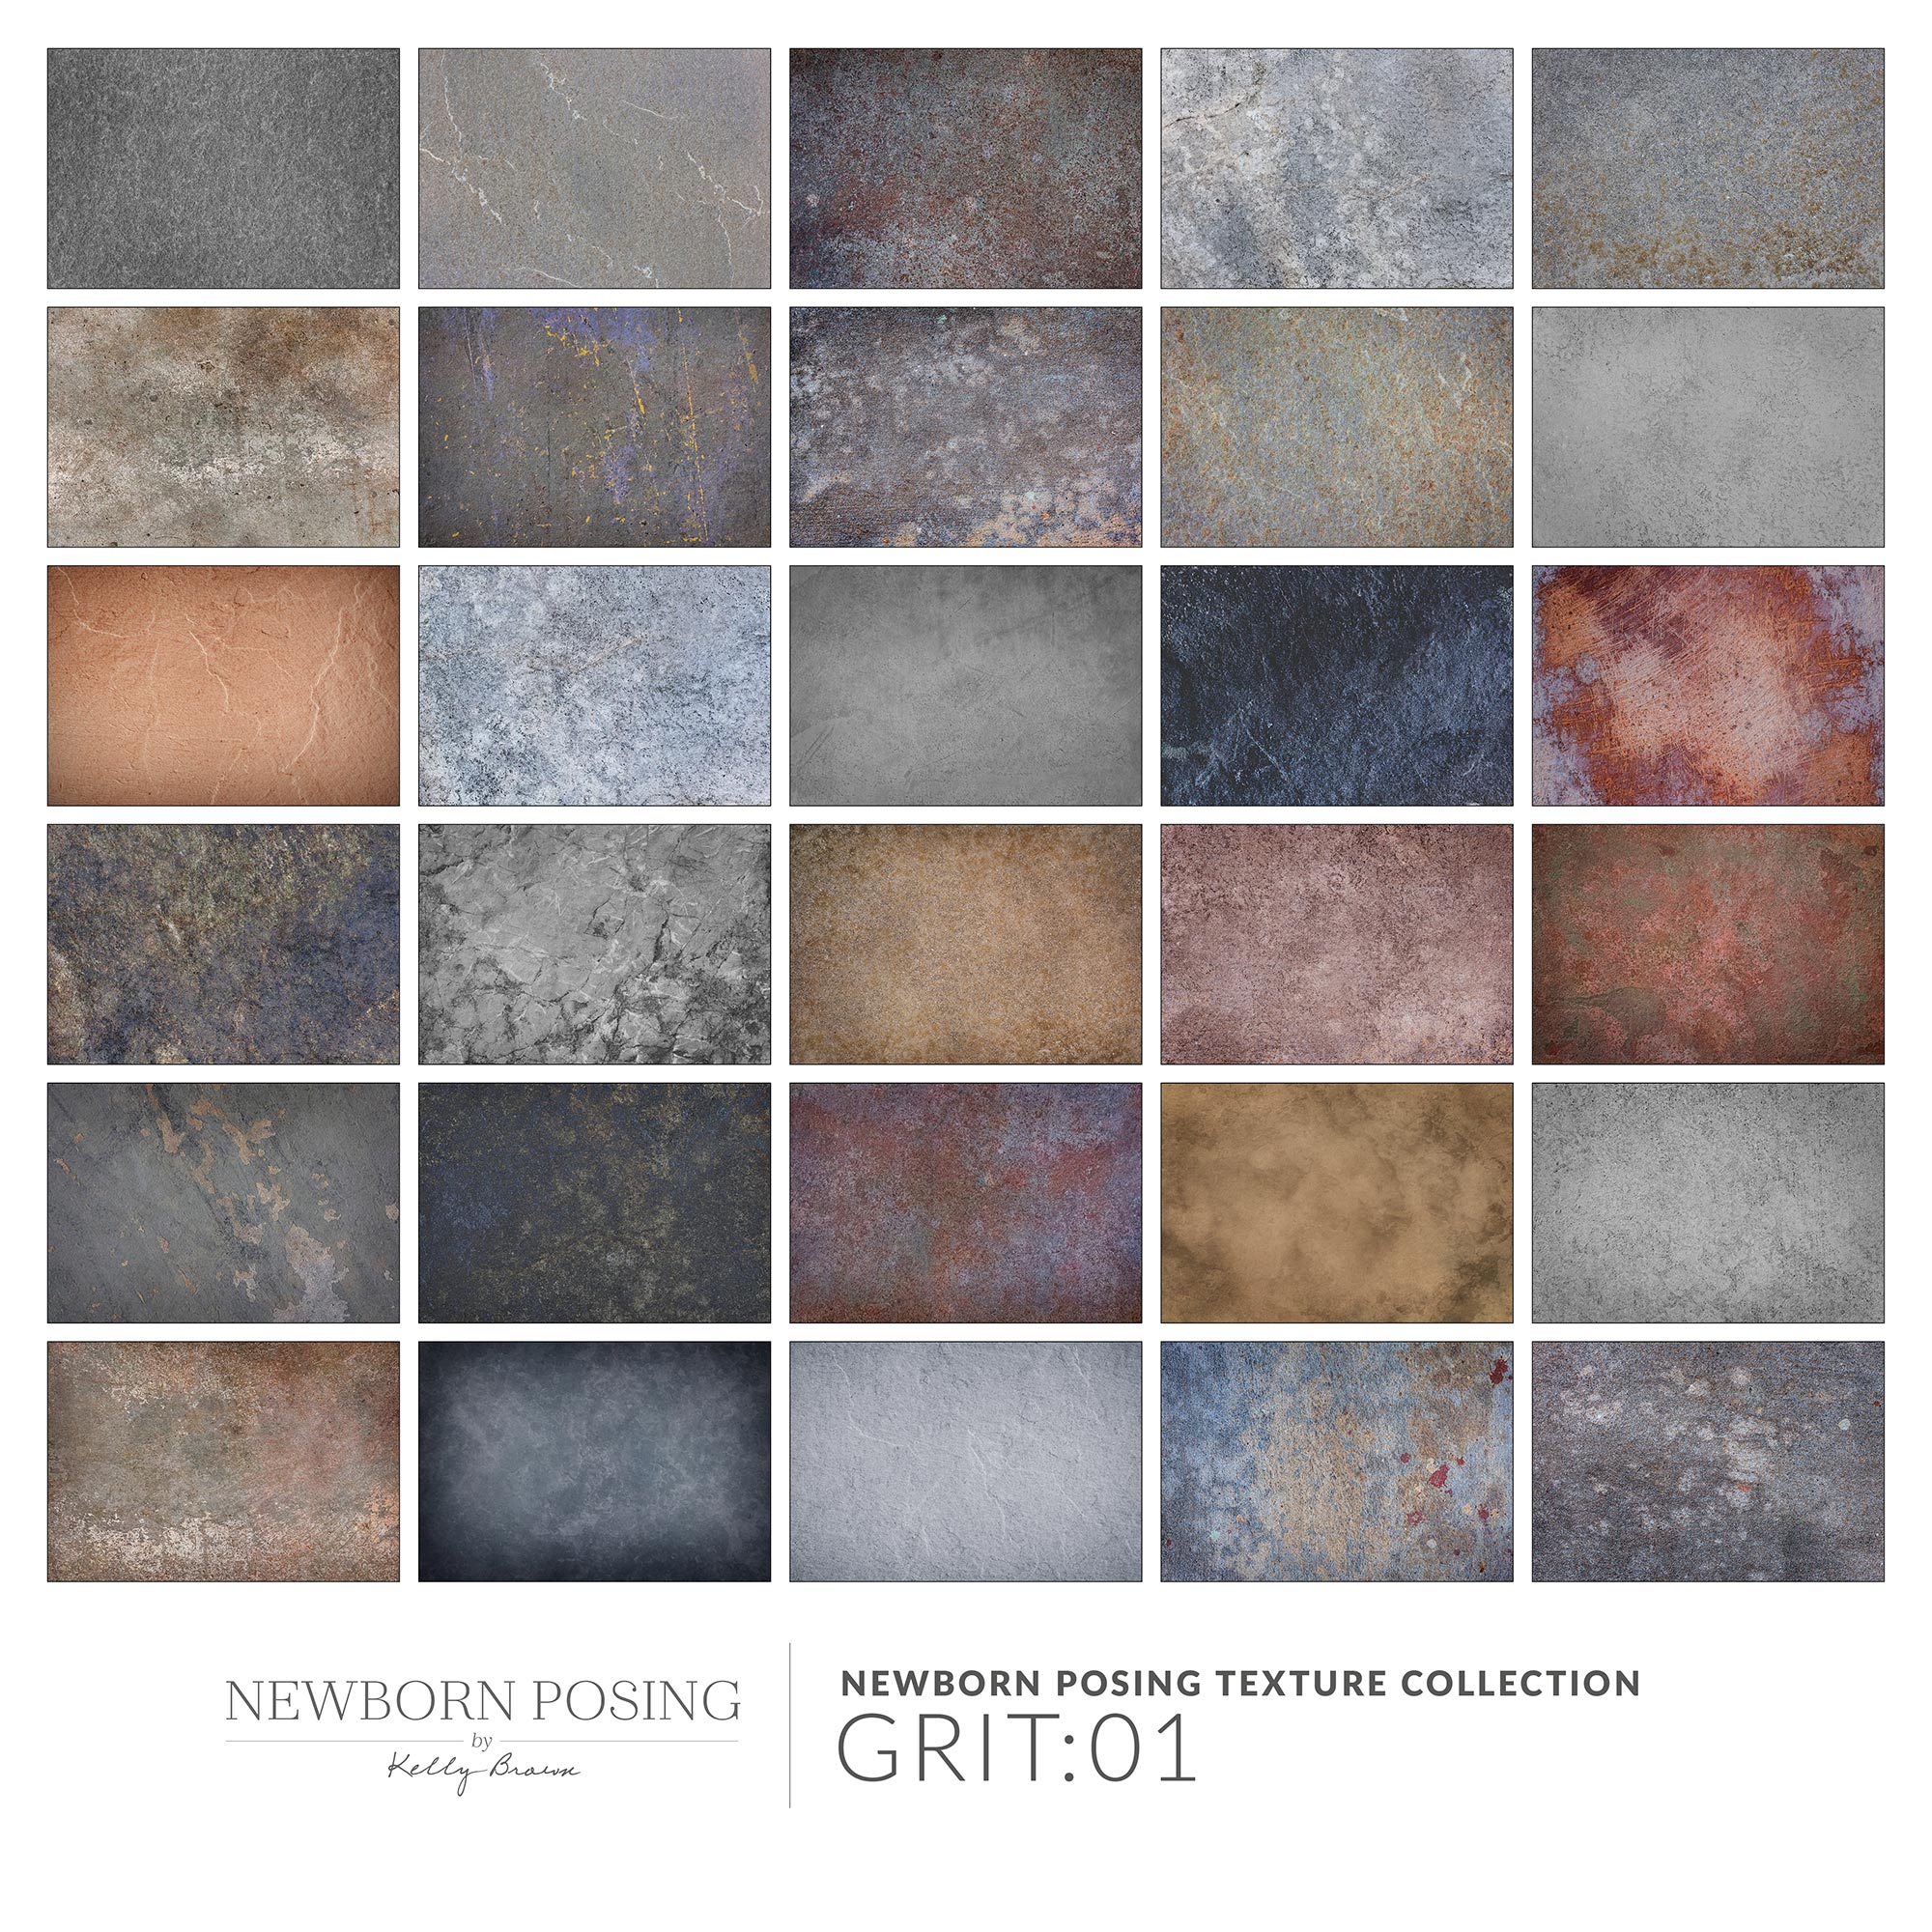 photoshop grit textures by kelly brown newborn posing photography